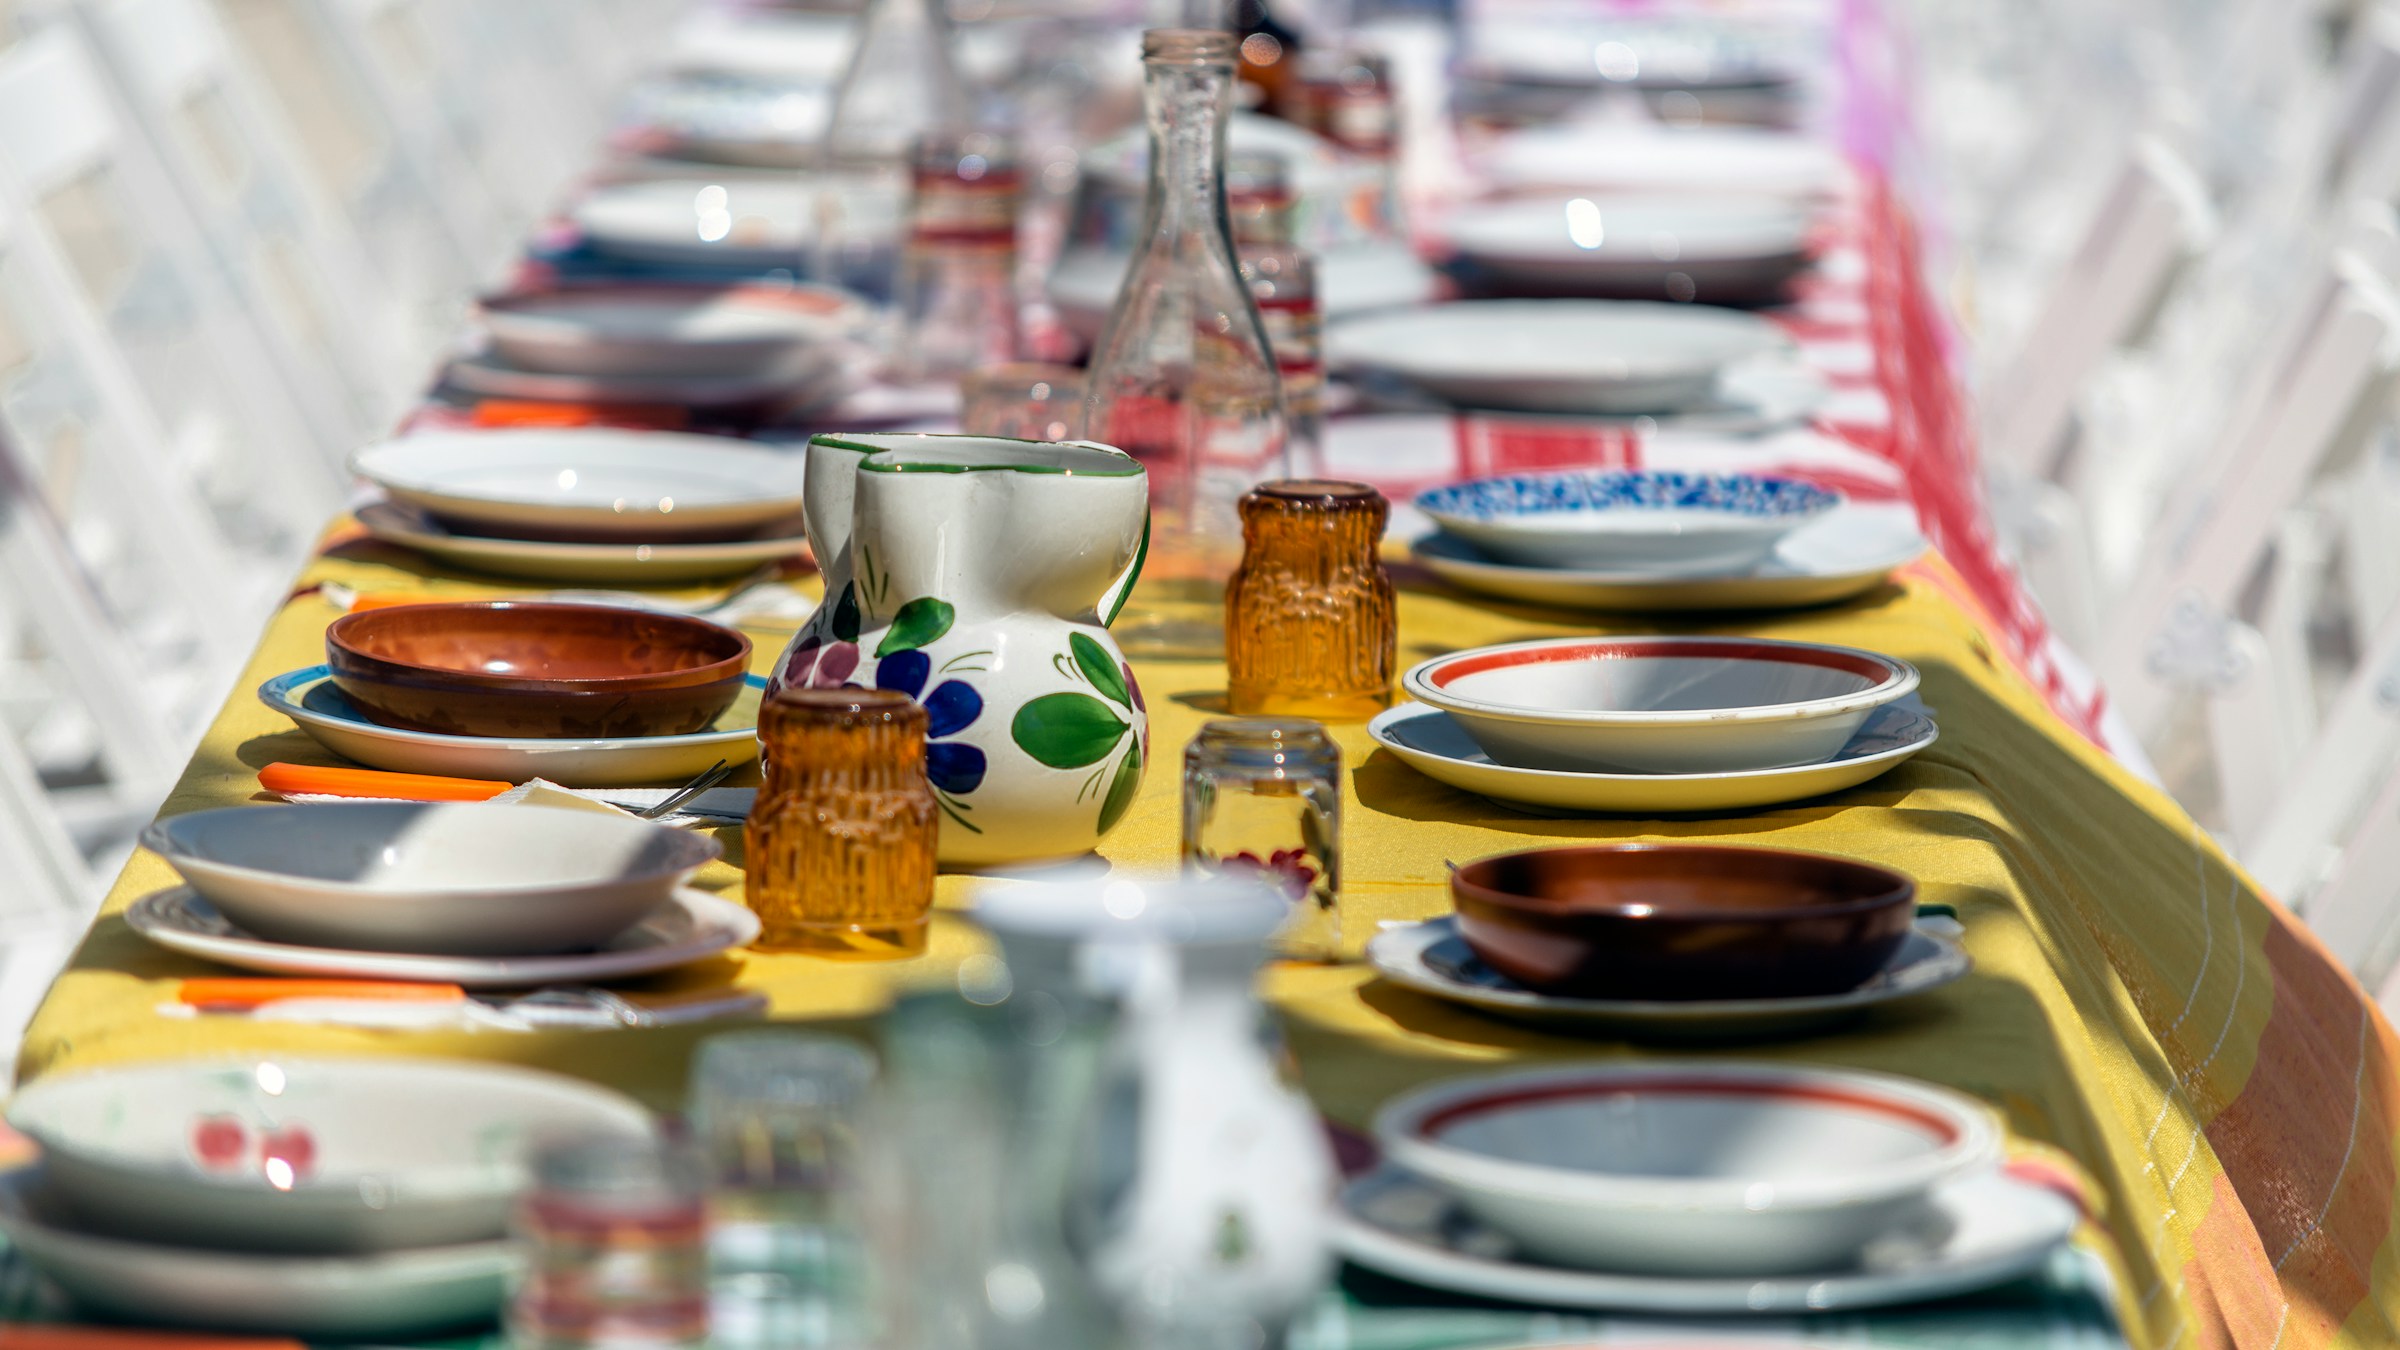 A long table full of colorful empty plates and cups on a colorful tablecloth flanked by white folding chairs. Photo by Mario Caruso via Unsplash.